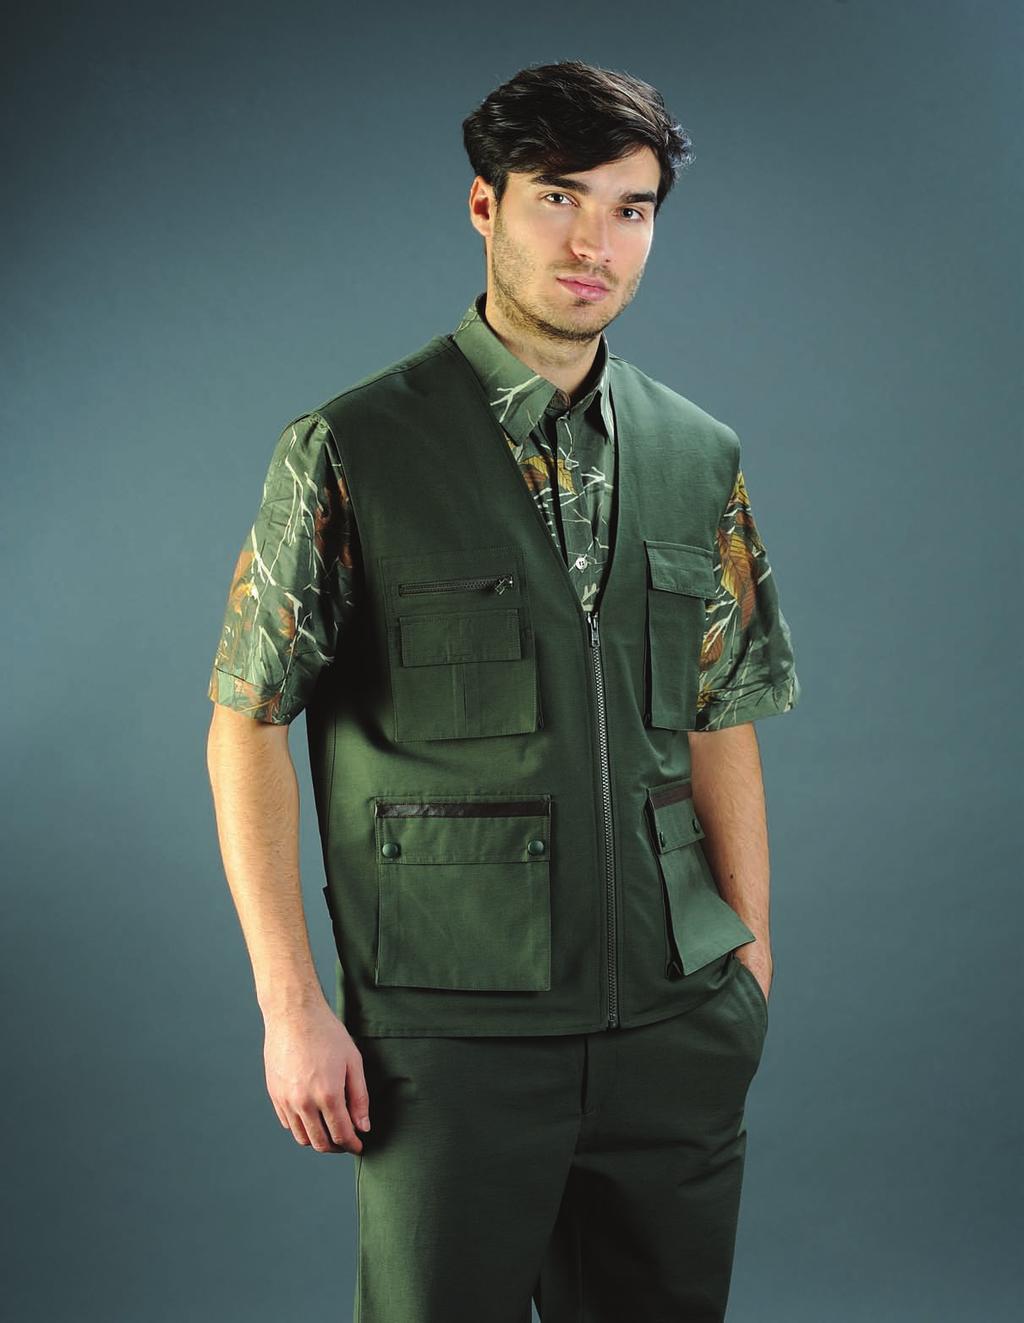 SHIRT CODE 50-3942 Short sleeves Pockets with flaps Camouflage pattern VEST CODE 30-3701 Functional pockets closed with buttons Chest pockets with flap Zippered chest